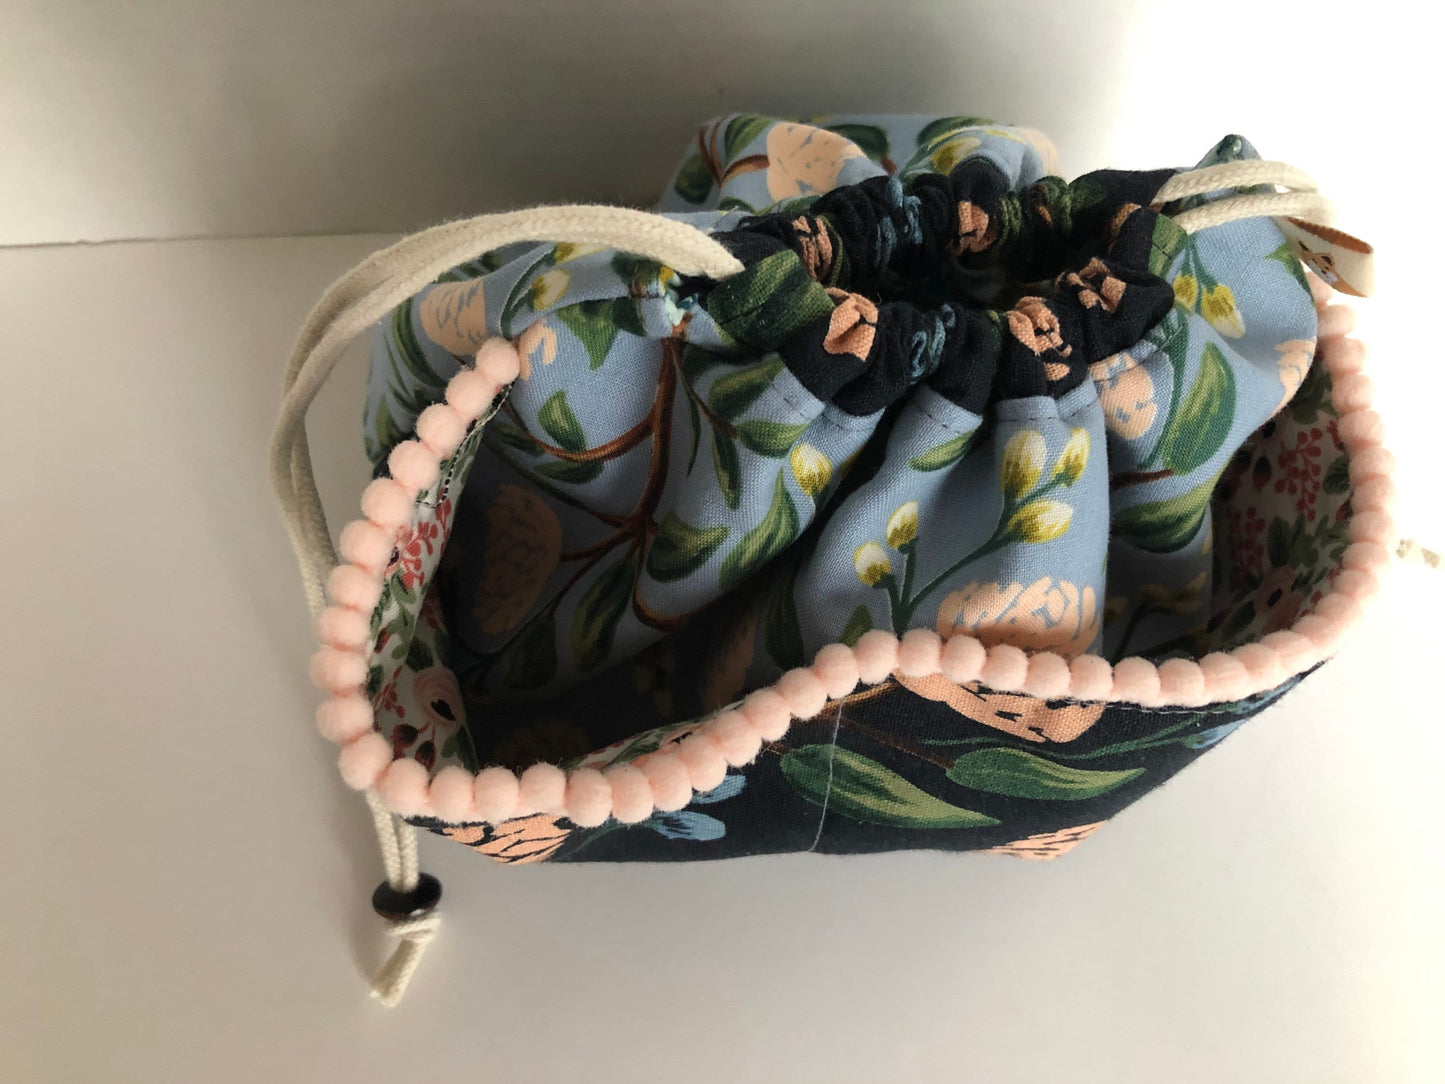 Small Project Bag, Drawstring Bag, Rifle Paper Co Peonies